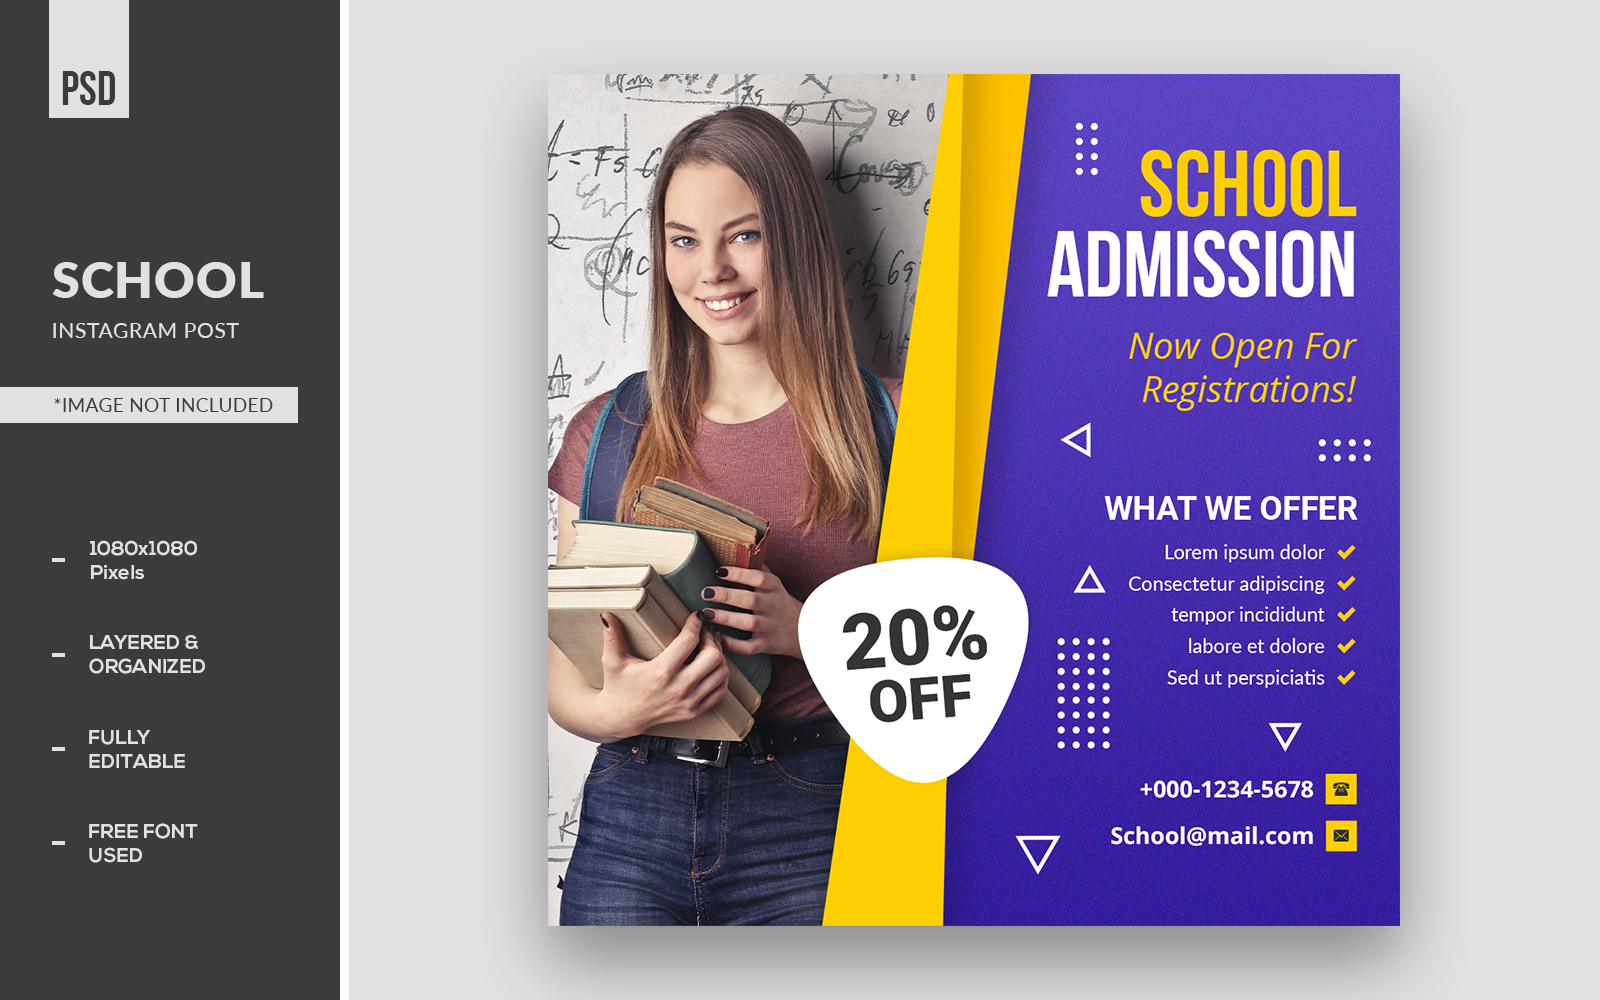 School Admission Instagram Post and Social Media Ads